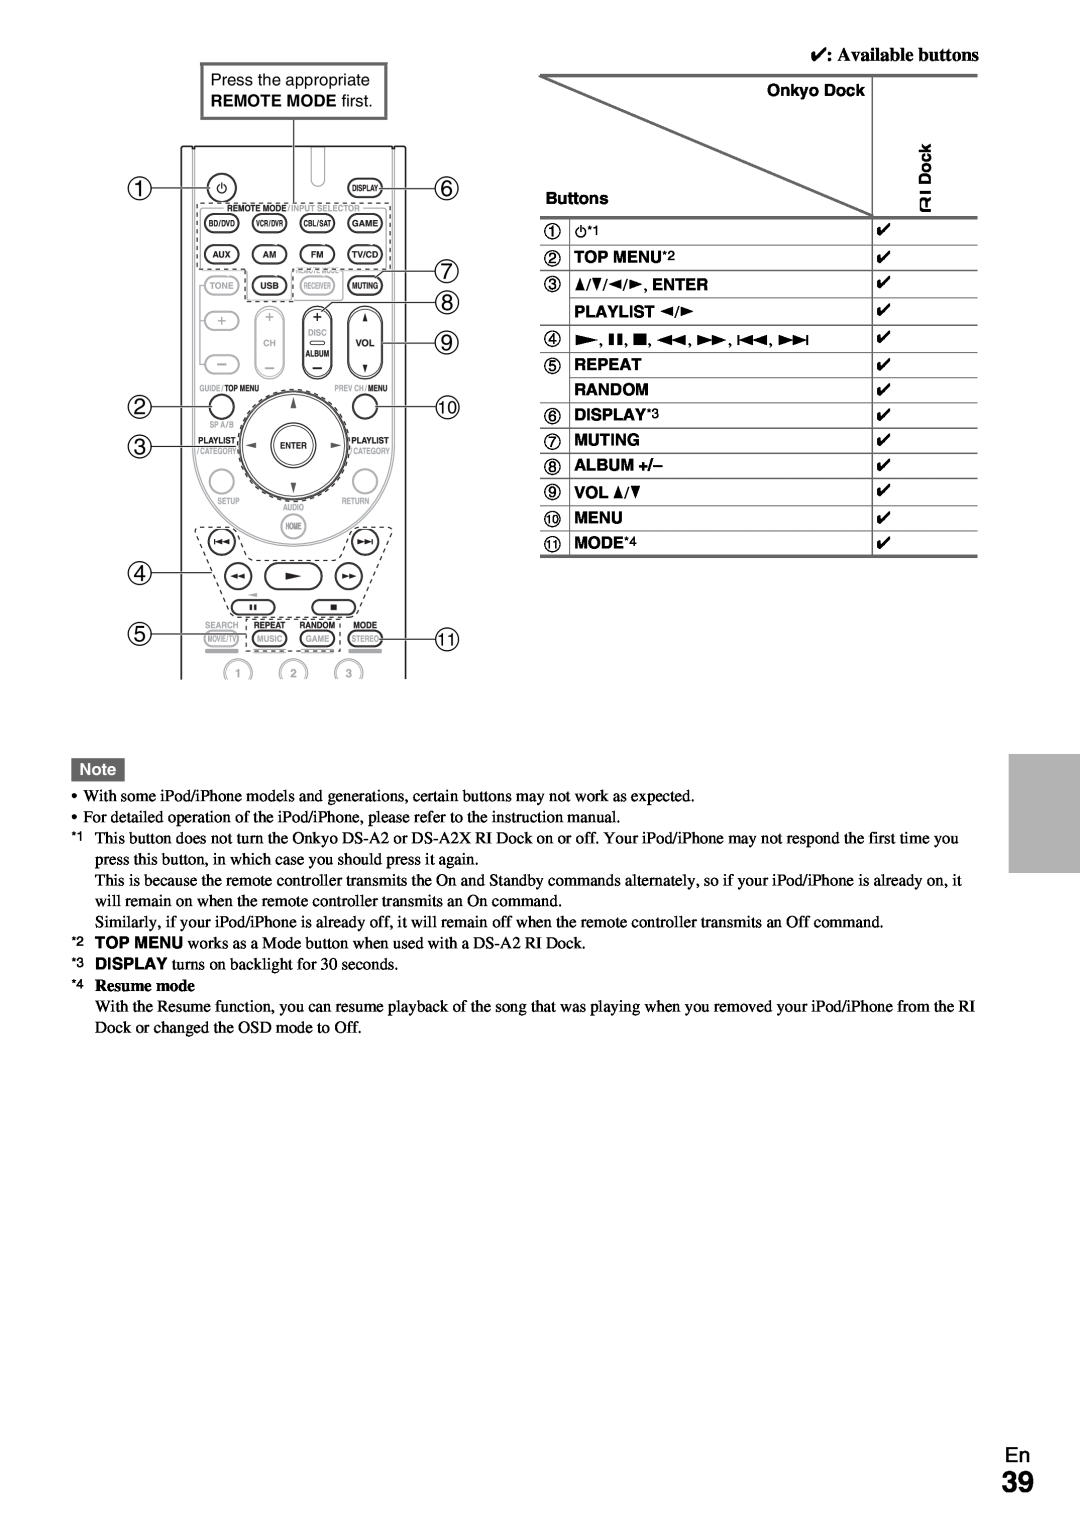 Onkyo TX-SR309 instruction manual Available buttons 